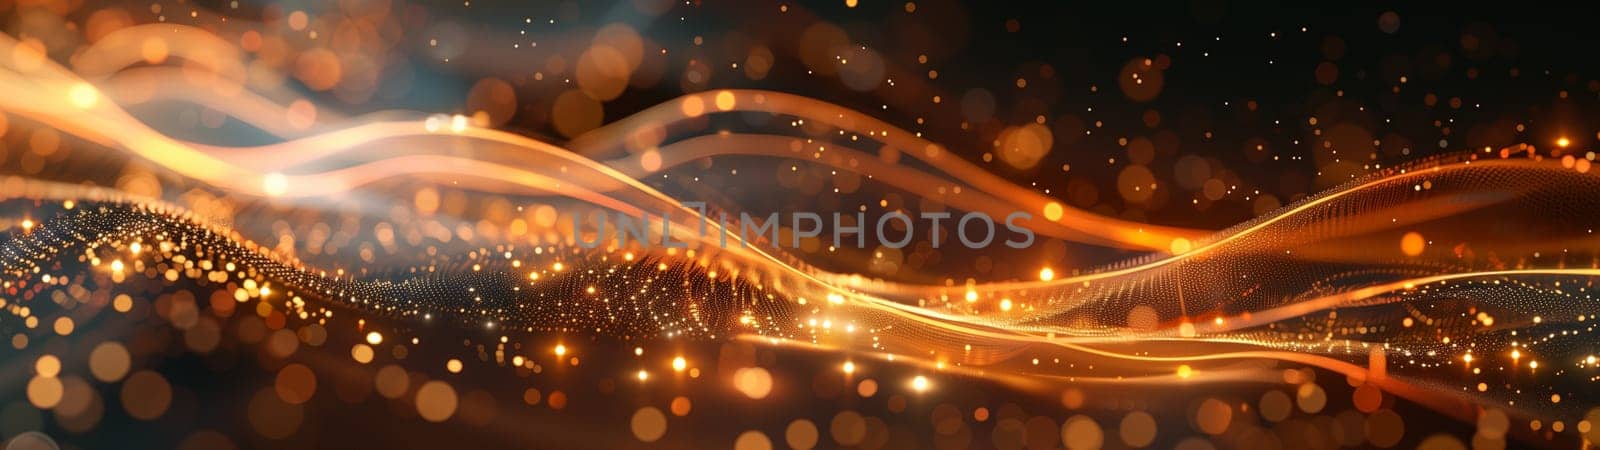 Colorful abstract 3d background with microparticles and waves. High quality photo